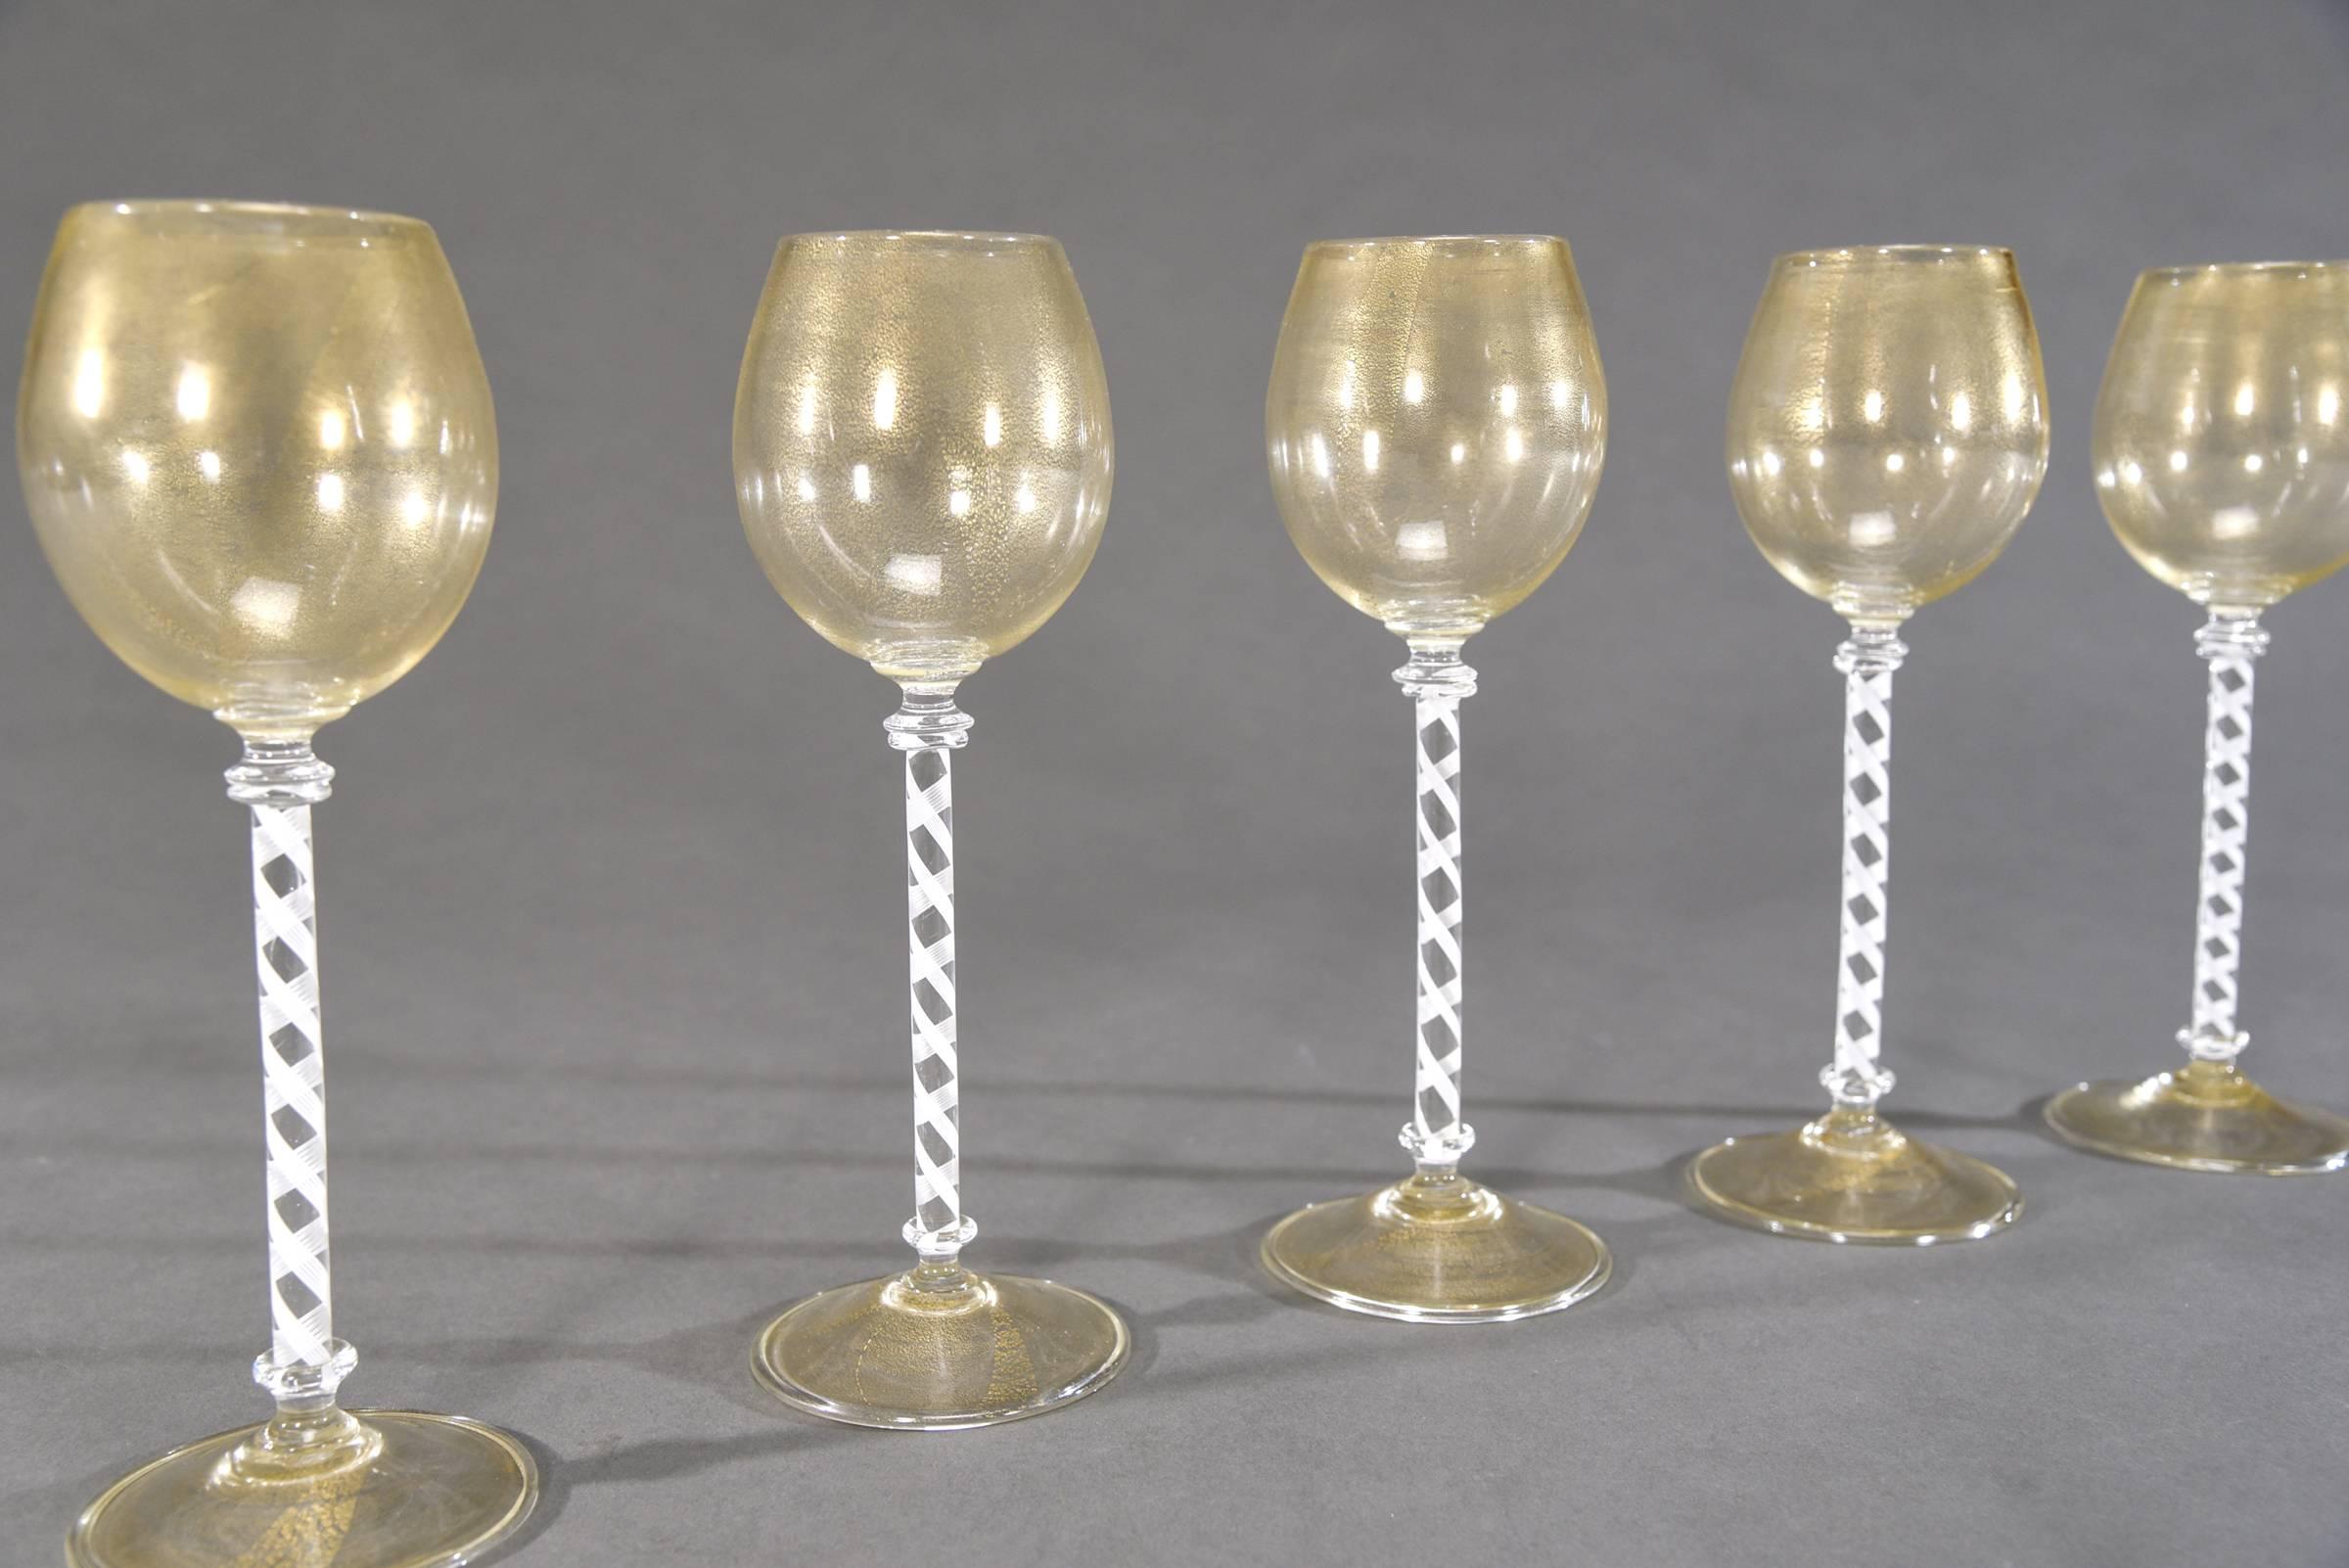 12 Venetian Goblets w/ White Cane Twist Stems & Gold Inclusions In Excellent Condition For Sale In Great Barrington, MA